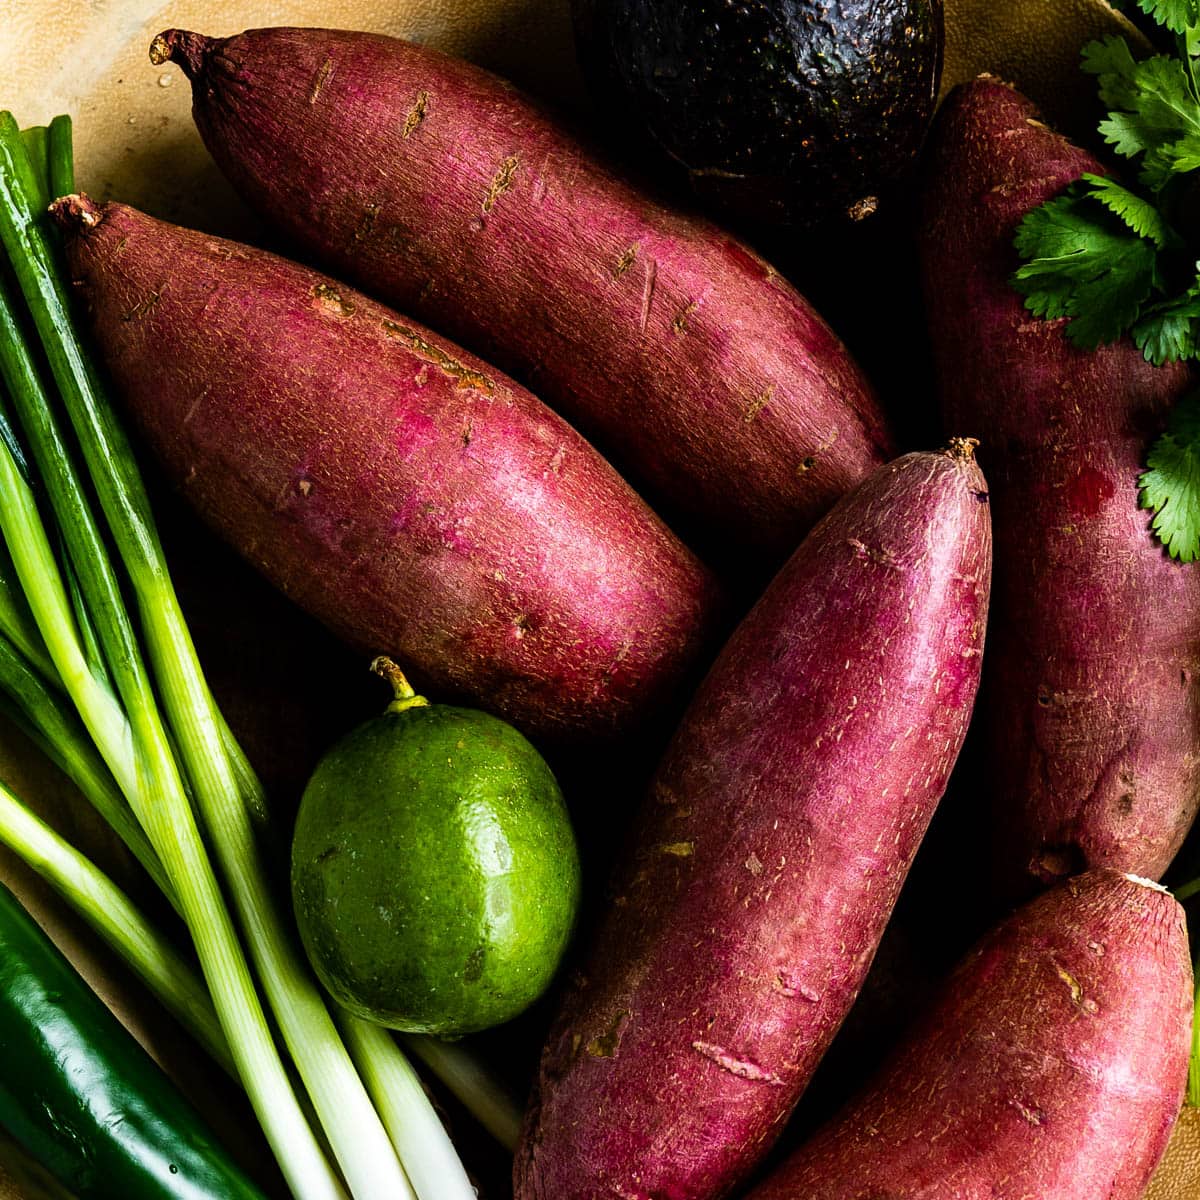 photo of sweet potatoes, green onions, limes and cilantro used in healthy sweet potato recipes